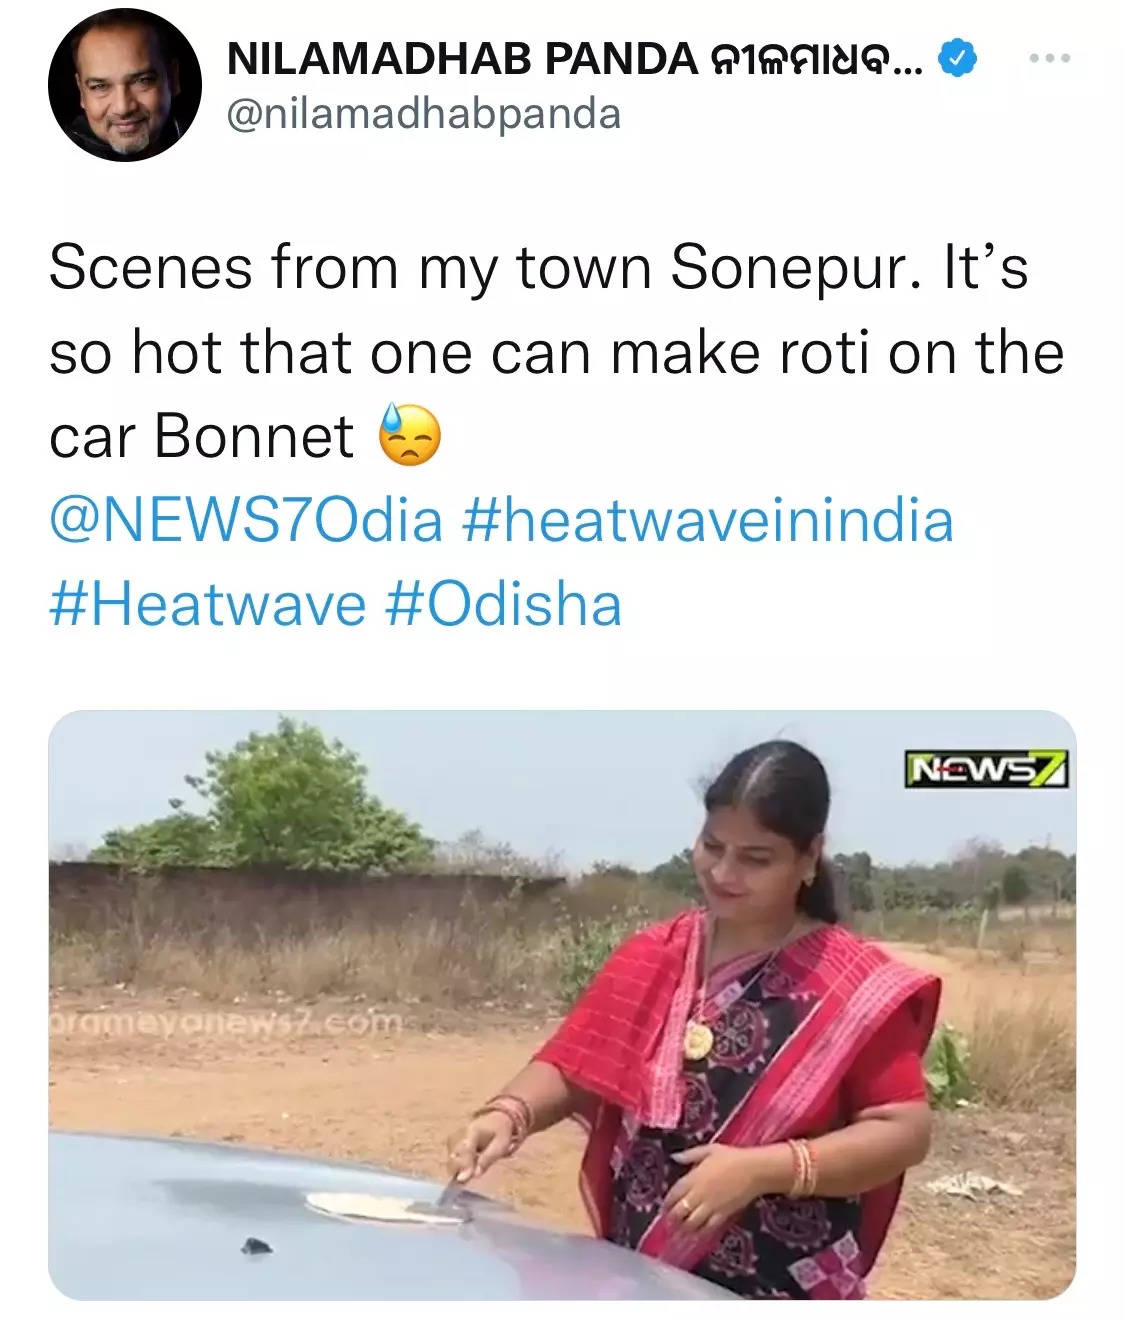 Filmmaker Nilamadhab Panda shared a tweet recently, showing a woman cooking roti on a car's bonnet in Odisha because of extreme heat